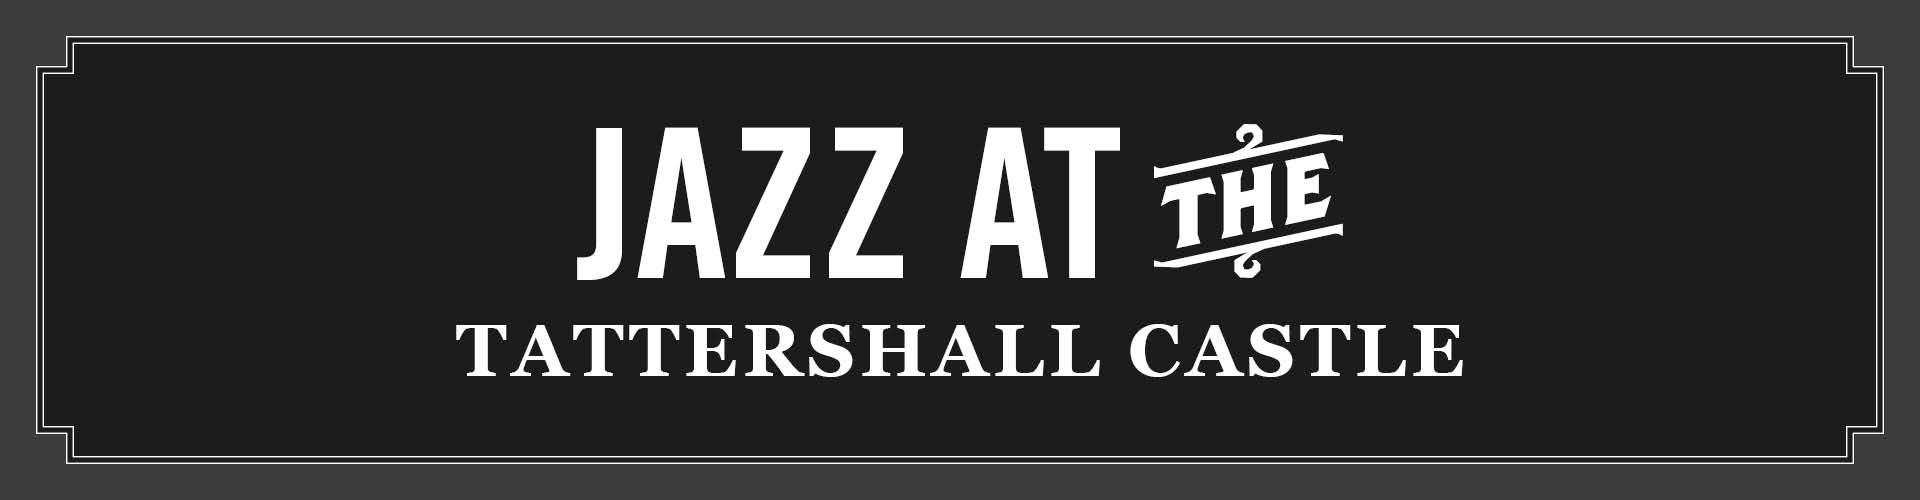 Jazz at the Tattershall Castle